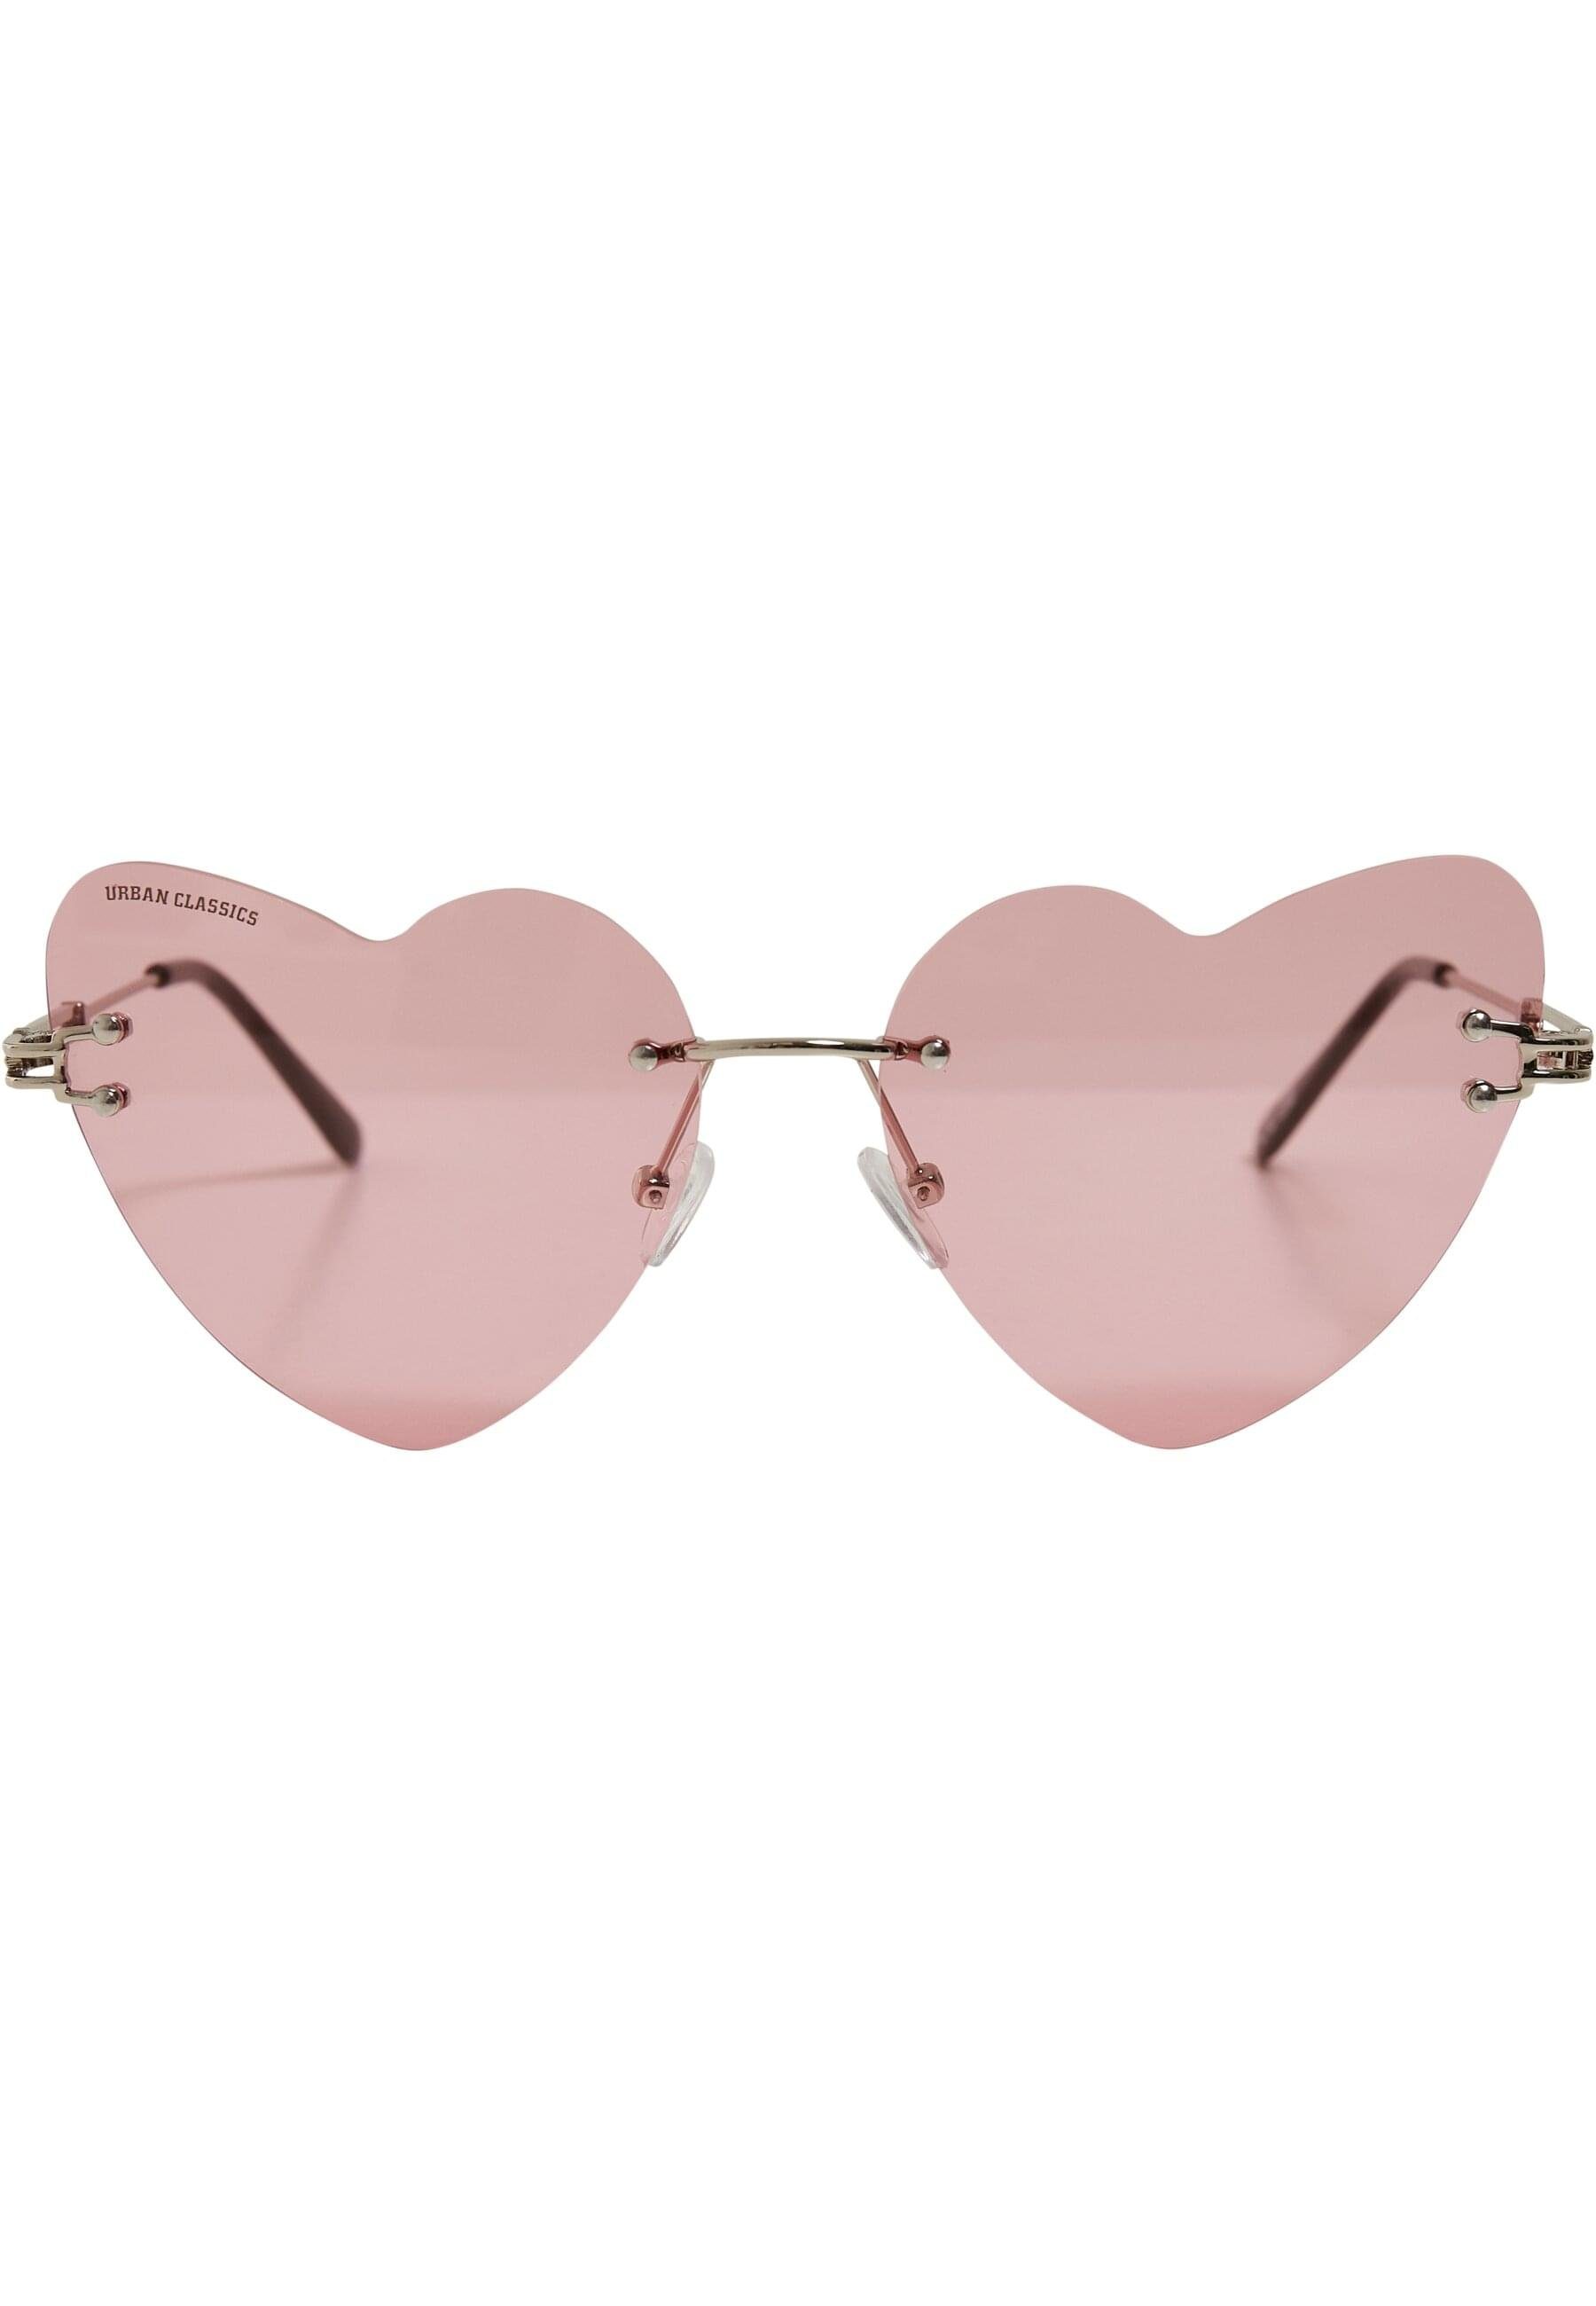 Sunglasses Heart With CLASSICS Chain Unisex Sonnenbrille rose/silver URBAN